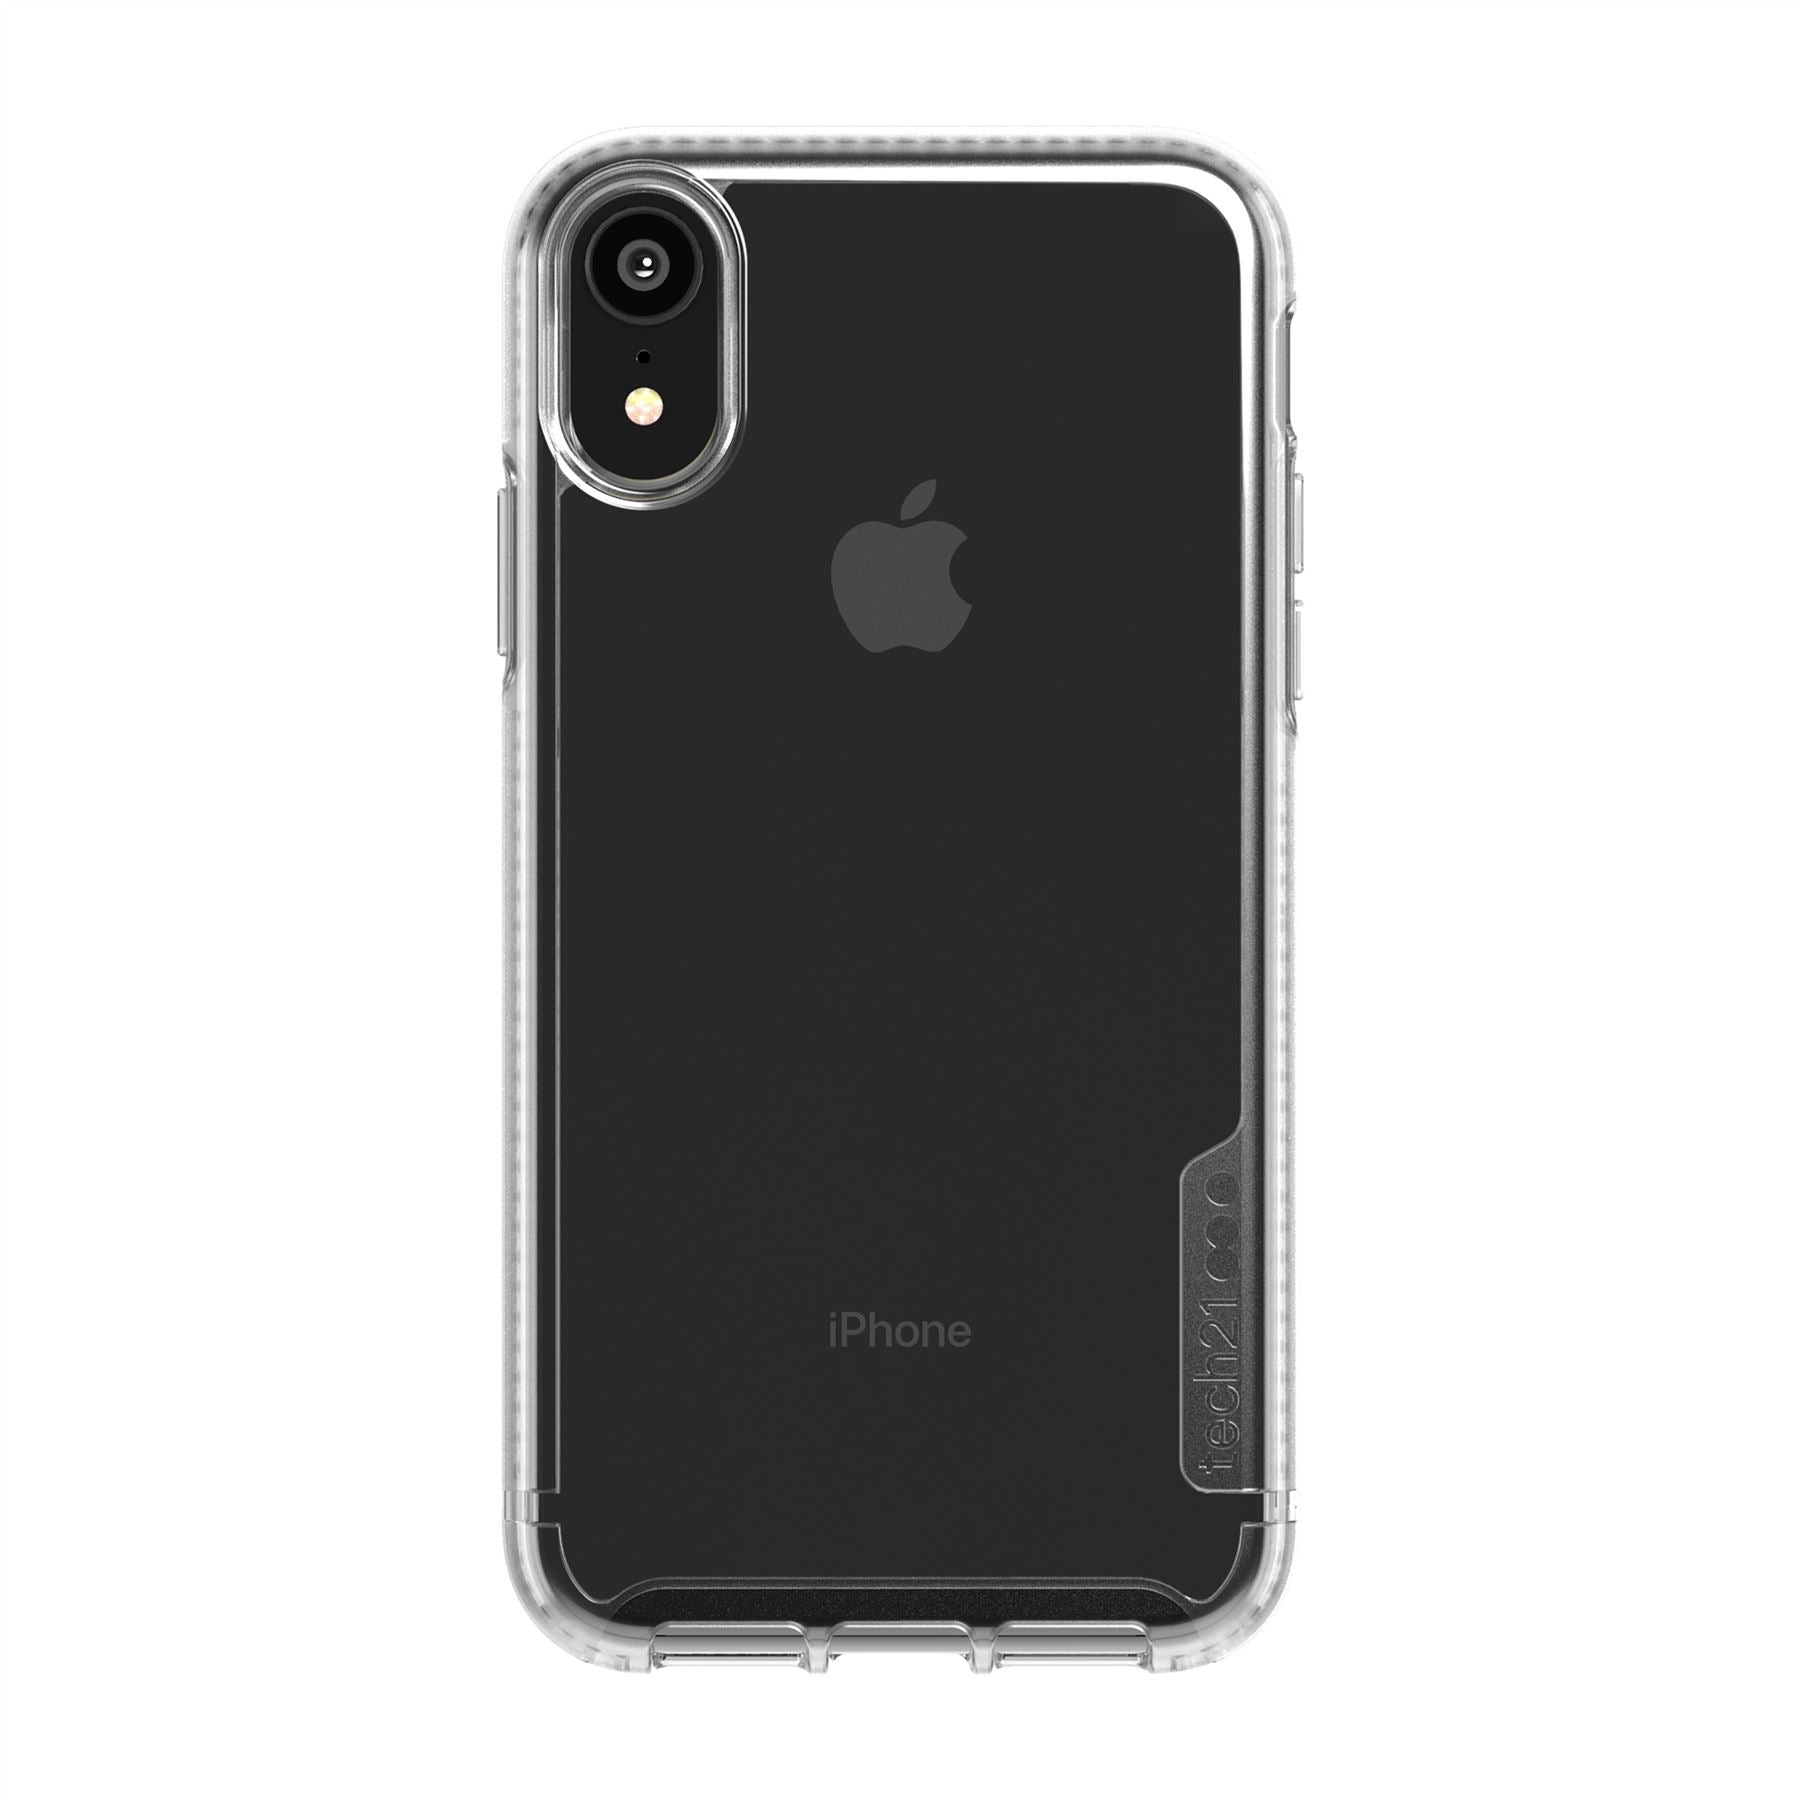 Apple is starting to sell its first iPhone XR case, and it's clear